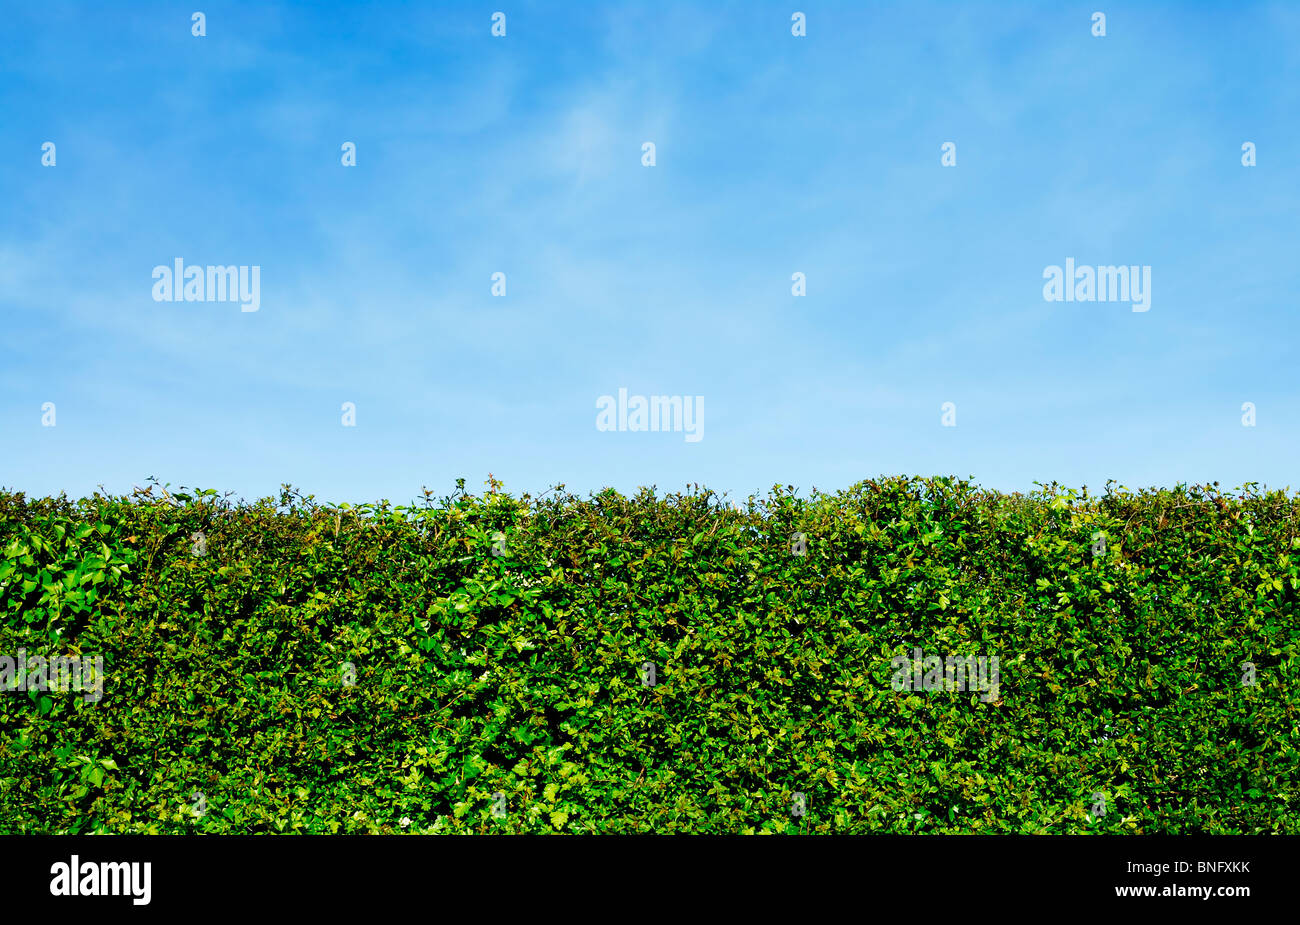 Garden Hedge in summer, with blue sky behind Stock Photo